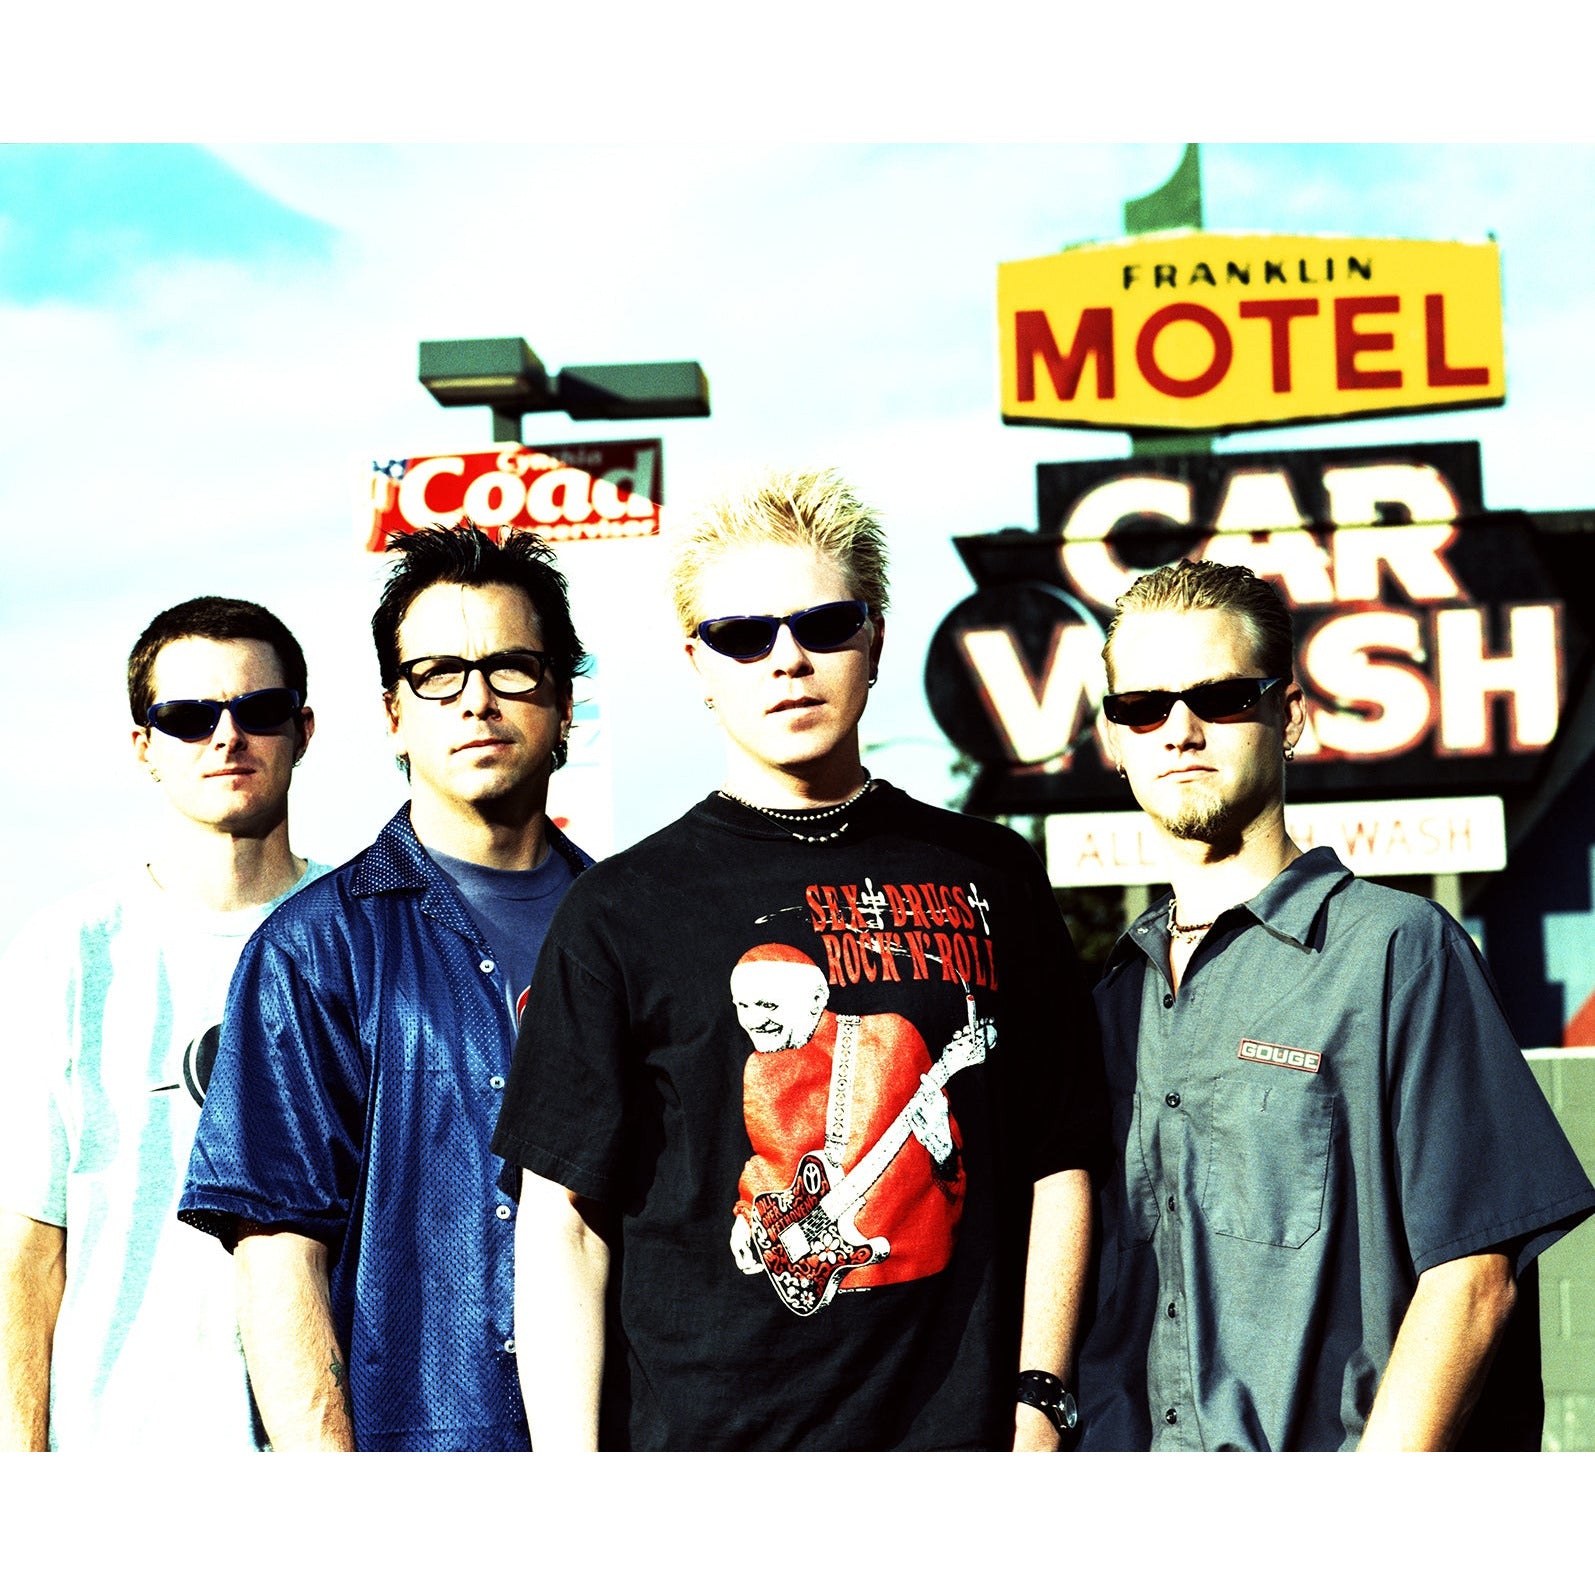 Offspring - motel - Scarlet Page - Limited Edition Prints